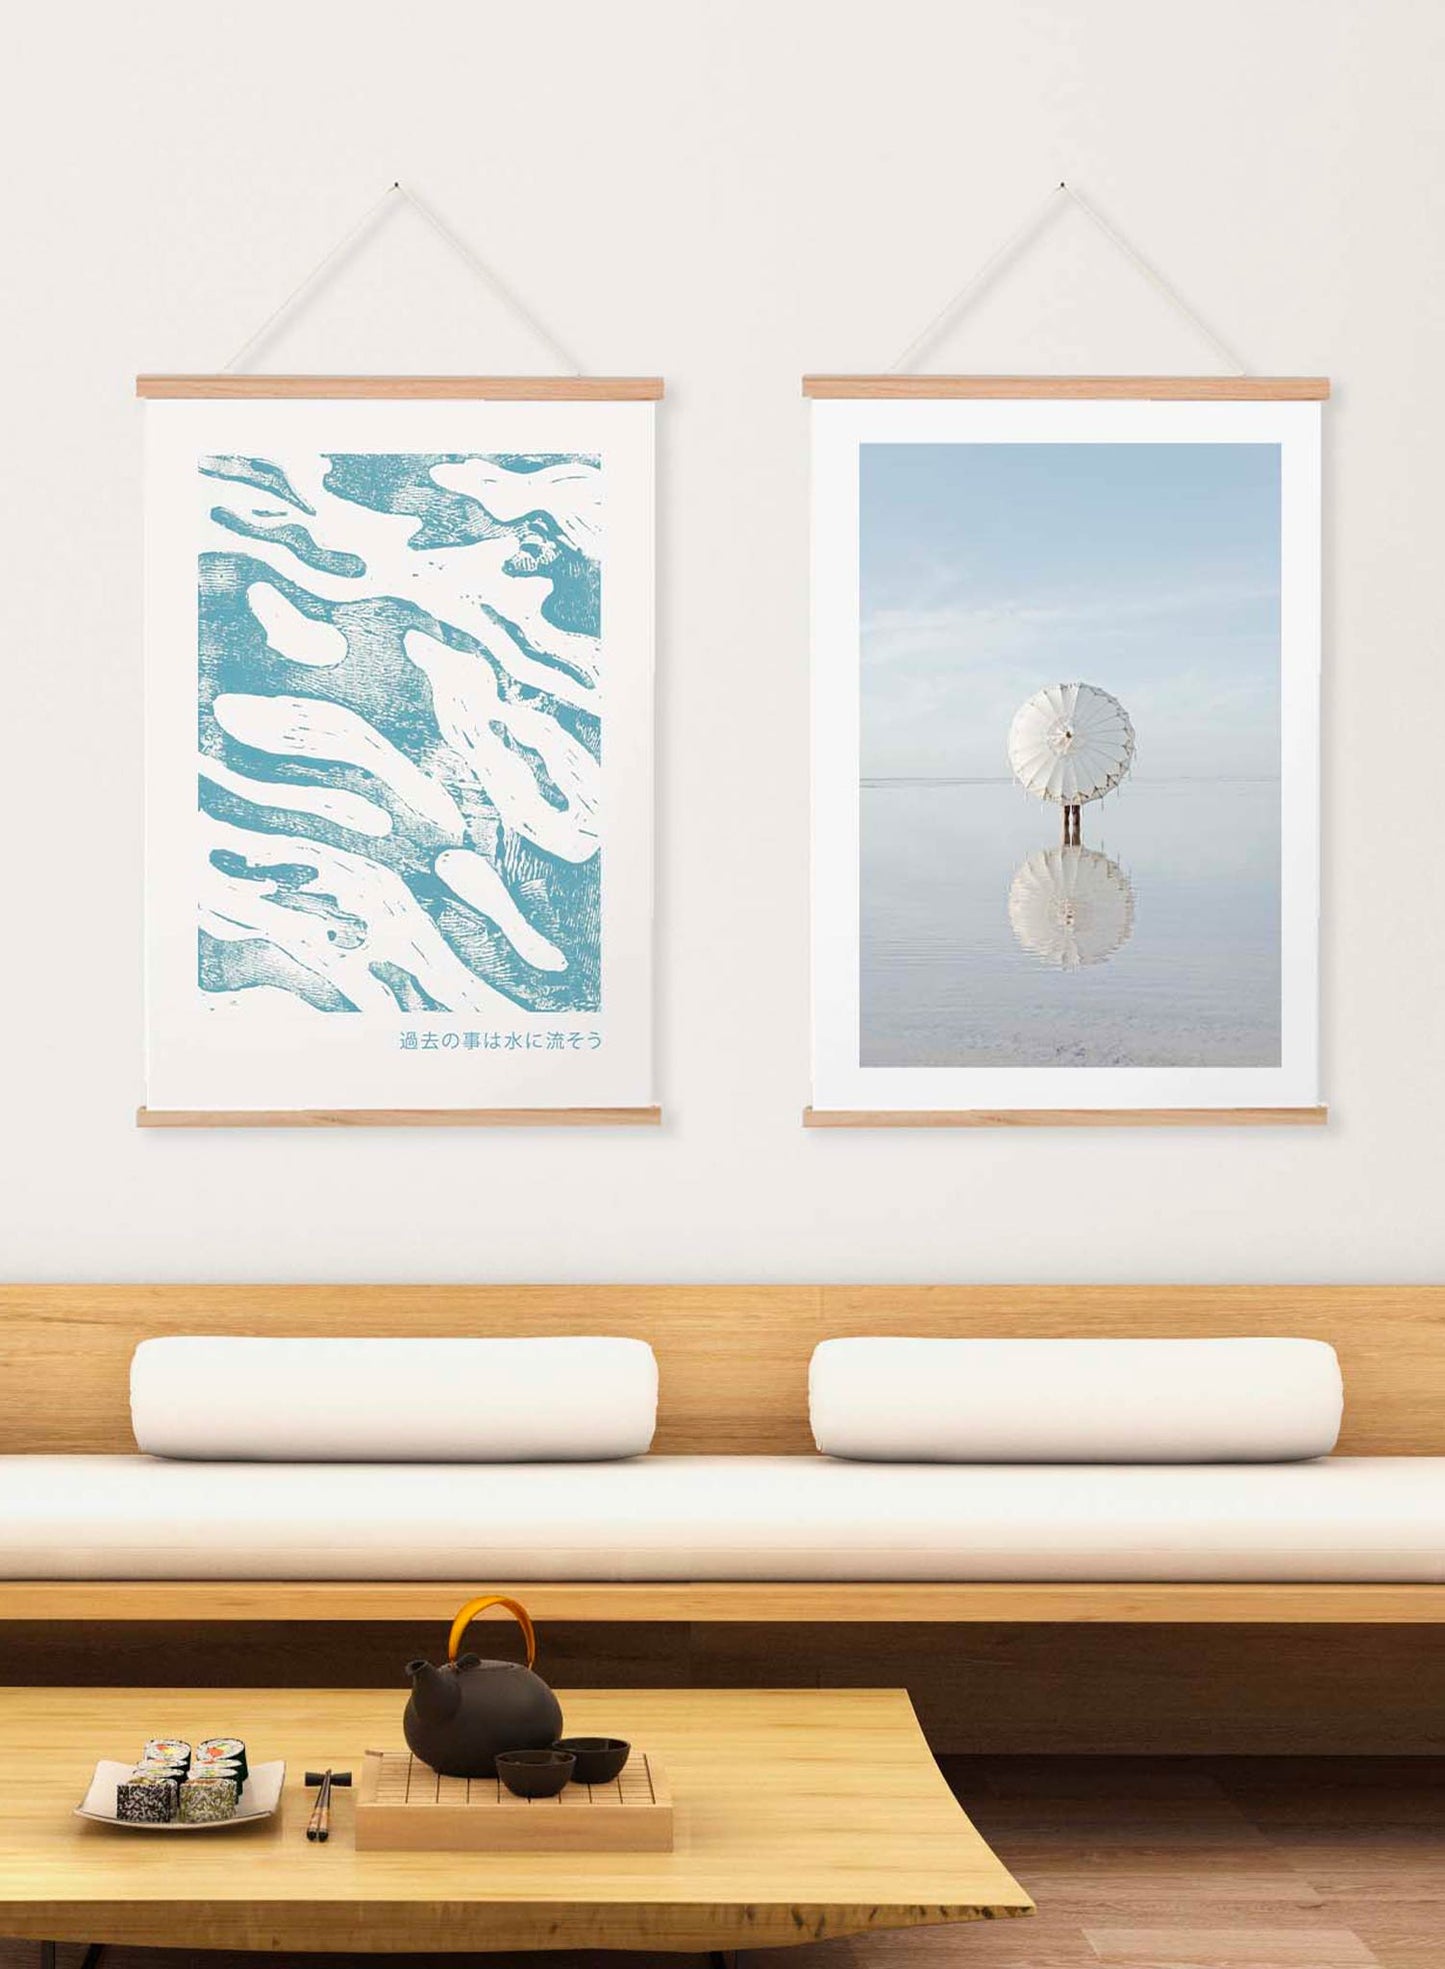 Riptide is a minimalist illustration by Opposite Wall of an abstract of curved thick lines looking like waves.